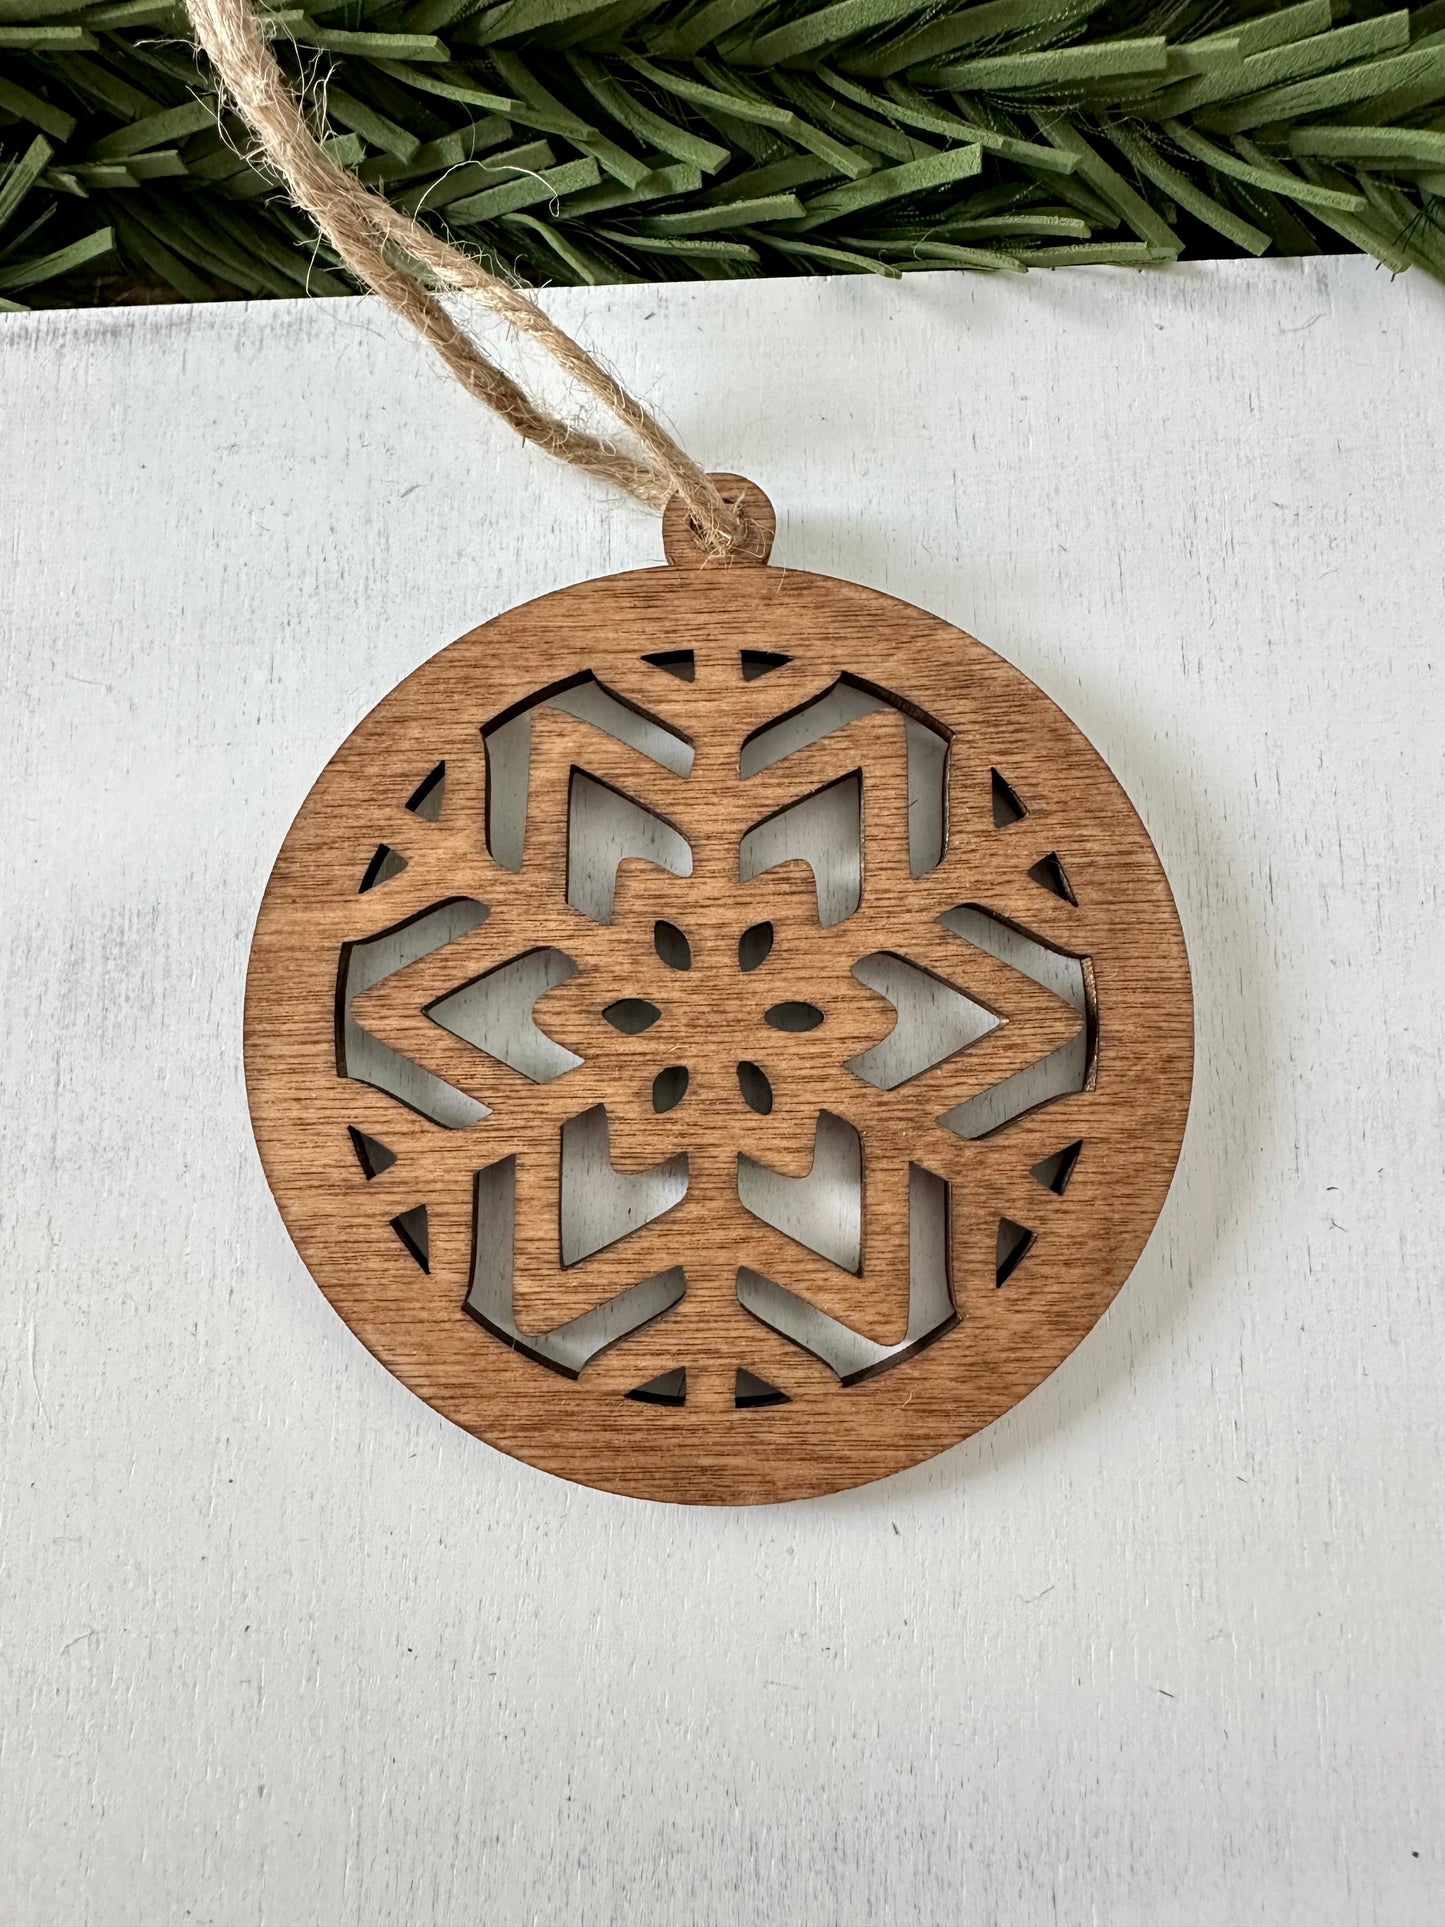 Snowflake Wood Ornaments - Early American Finish